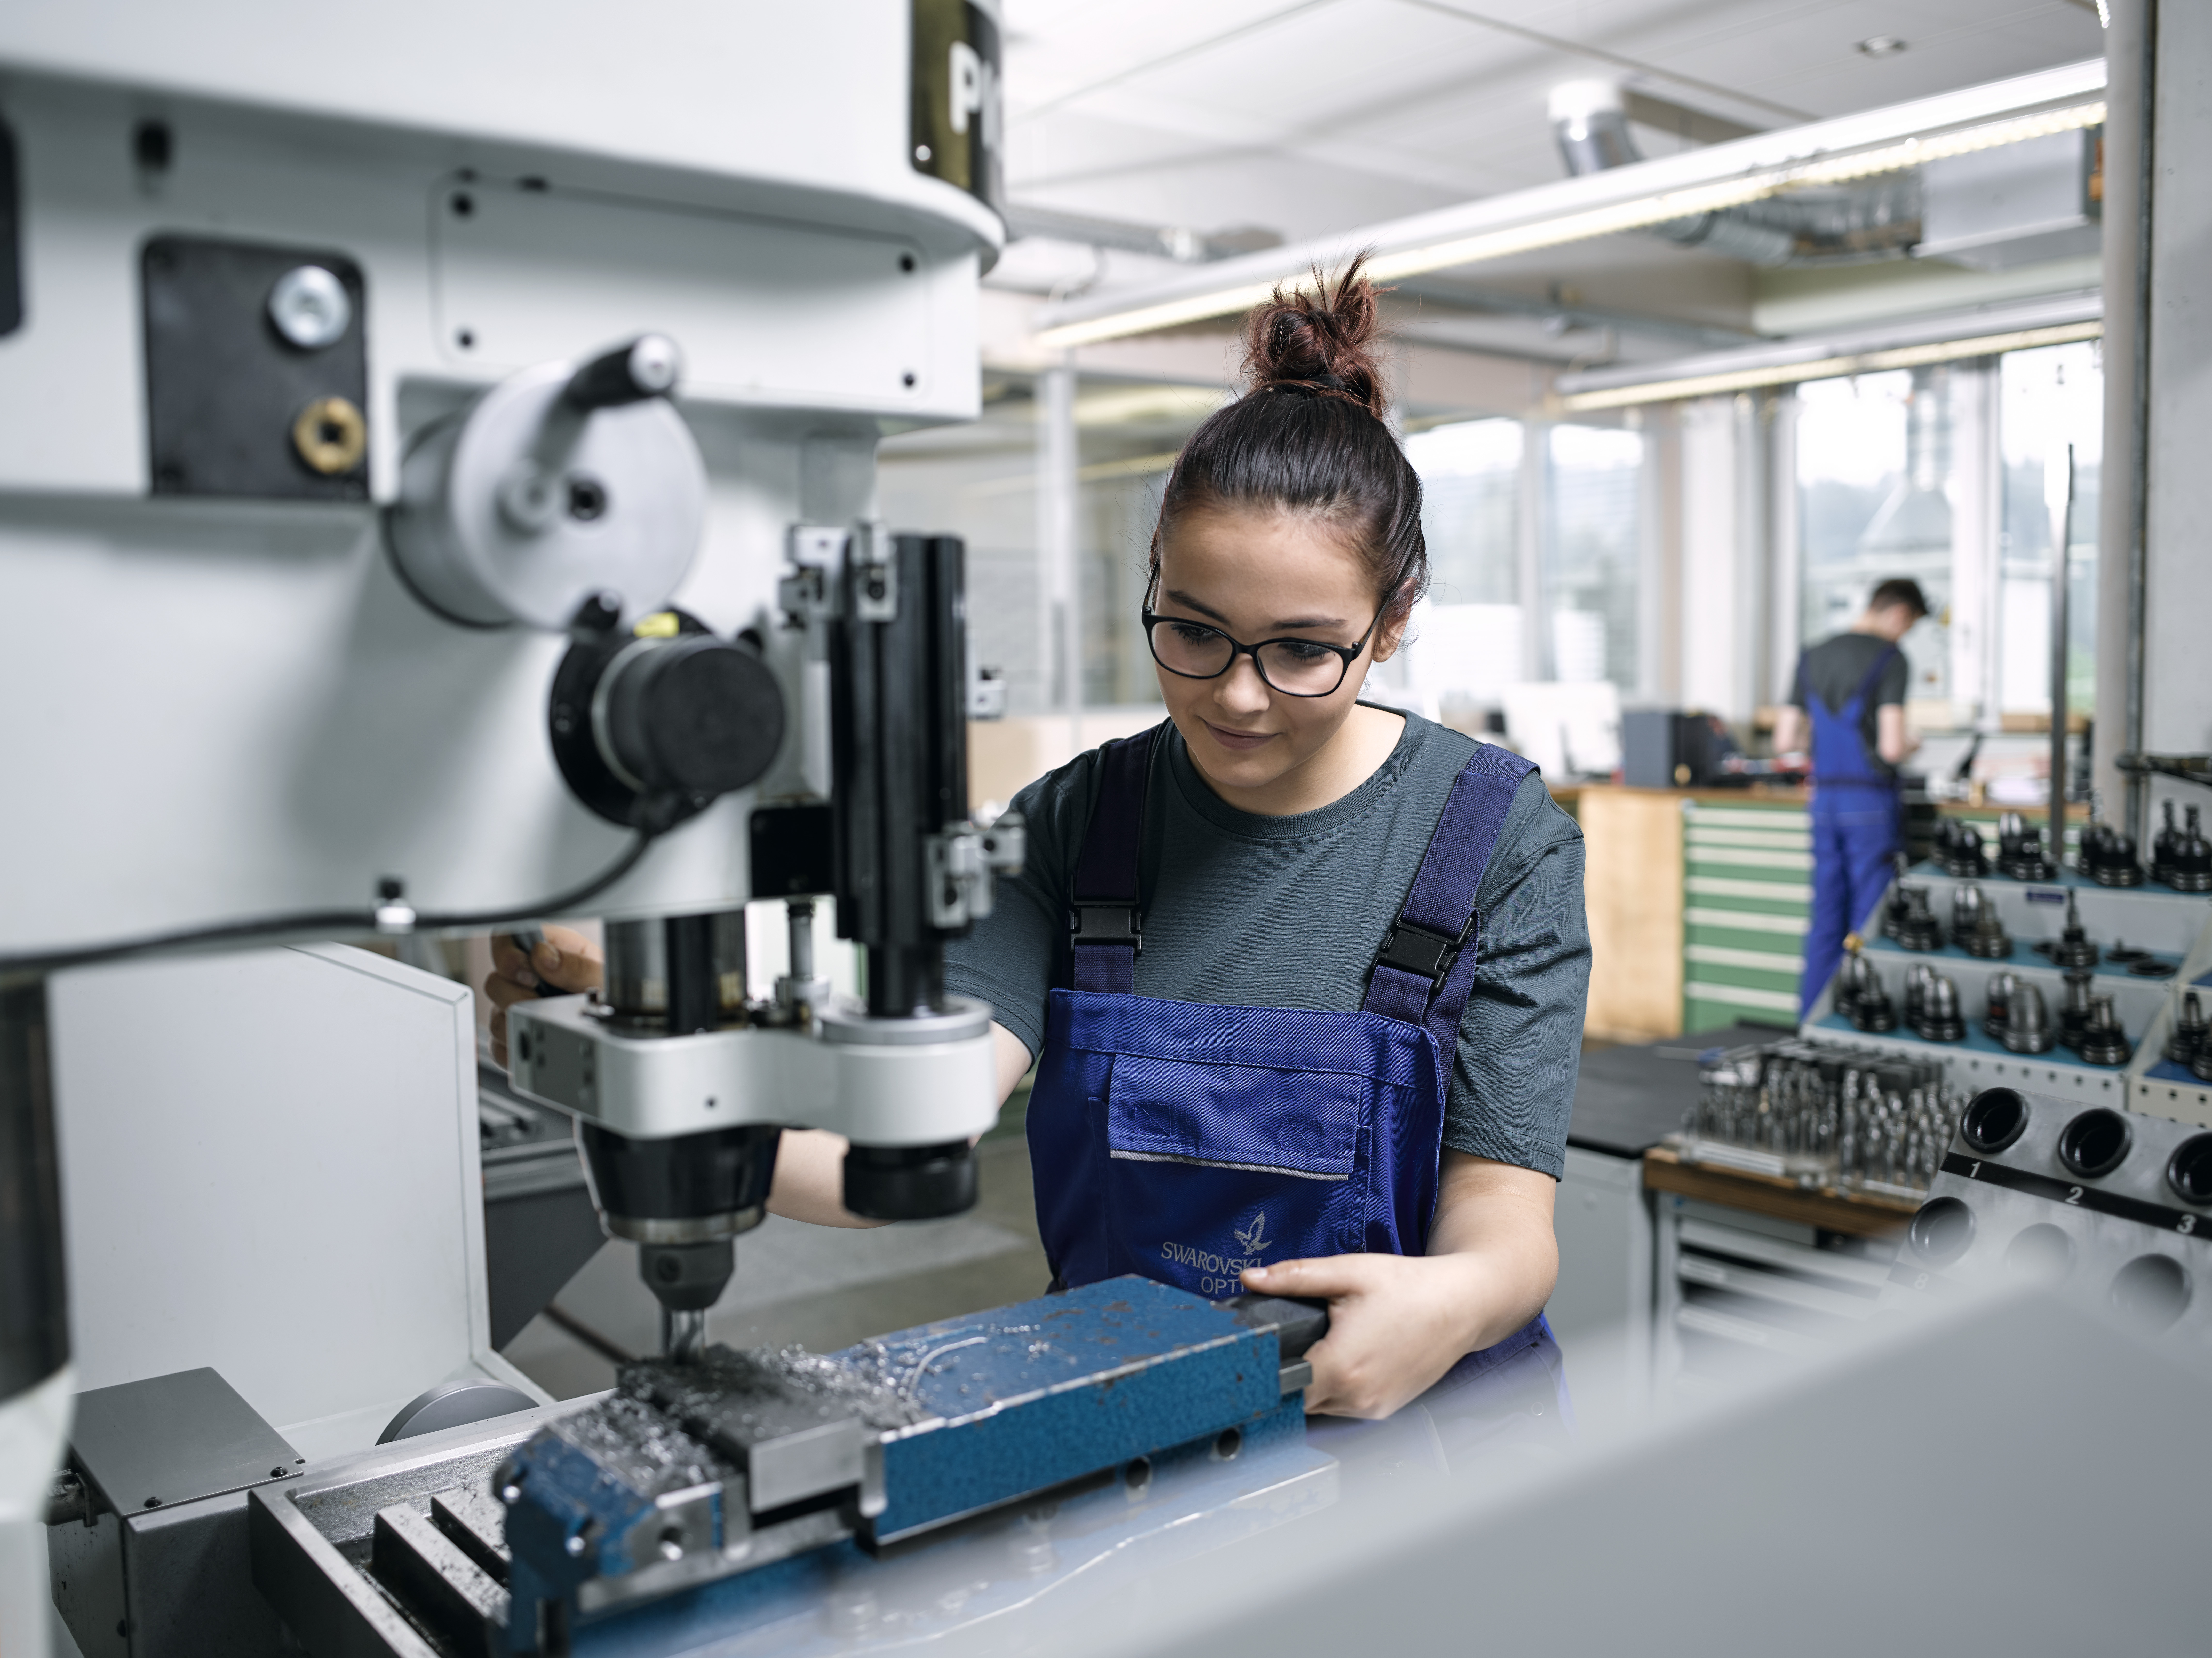 SWAROVSKI OPTIK has been training apprentices in our own training workshops in Absam, Tyrol since the company was founded in 1949 in the fields of cutting technology, precision optics and, starting in 2019, automation and process control technology. 